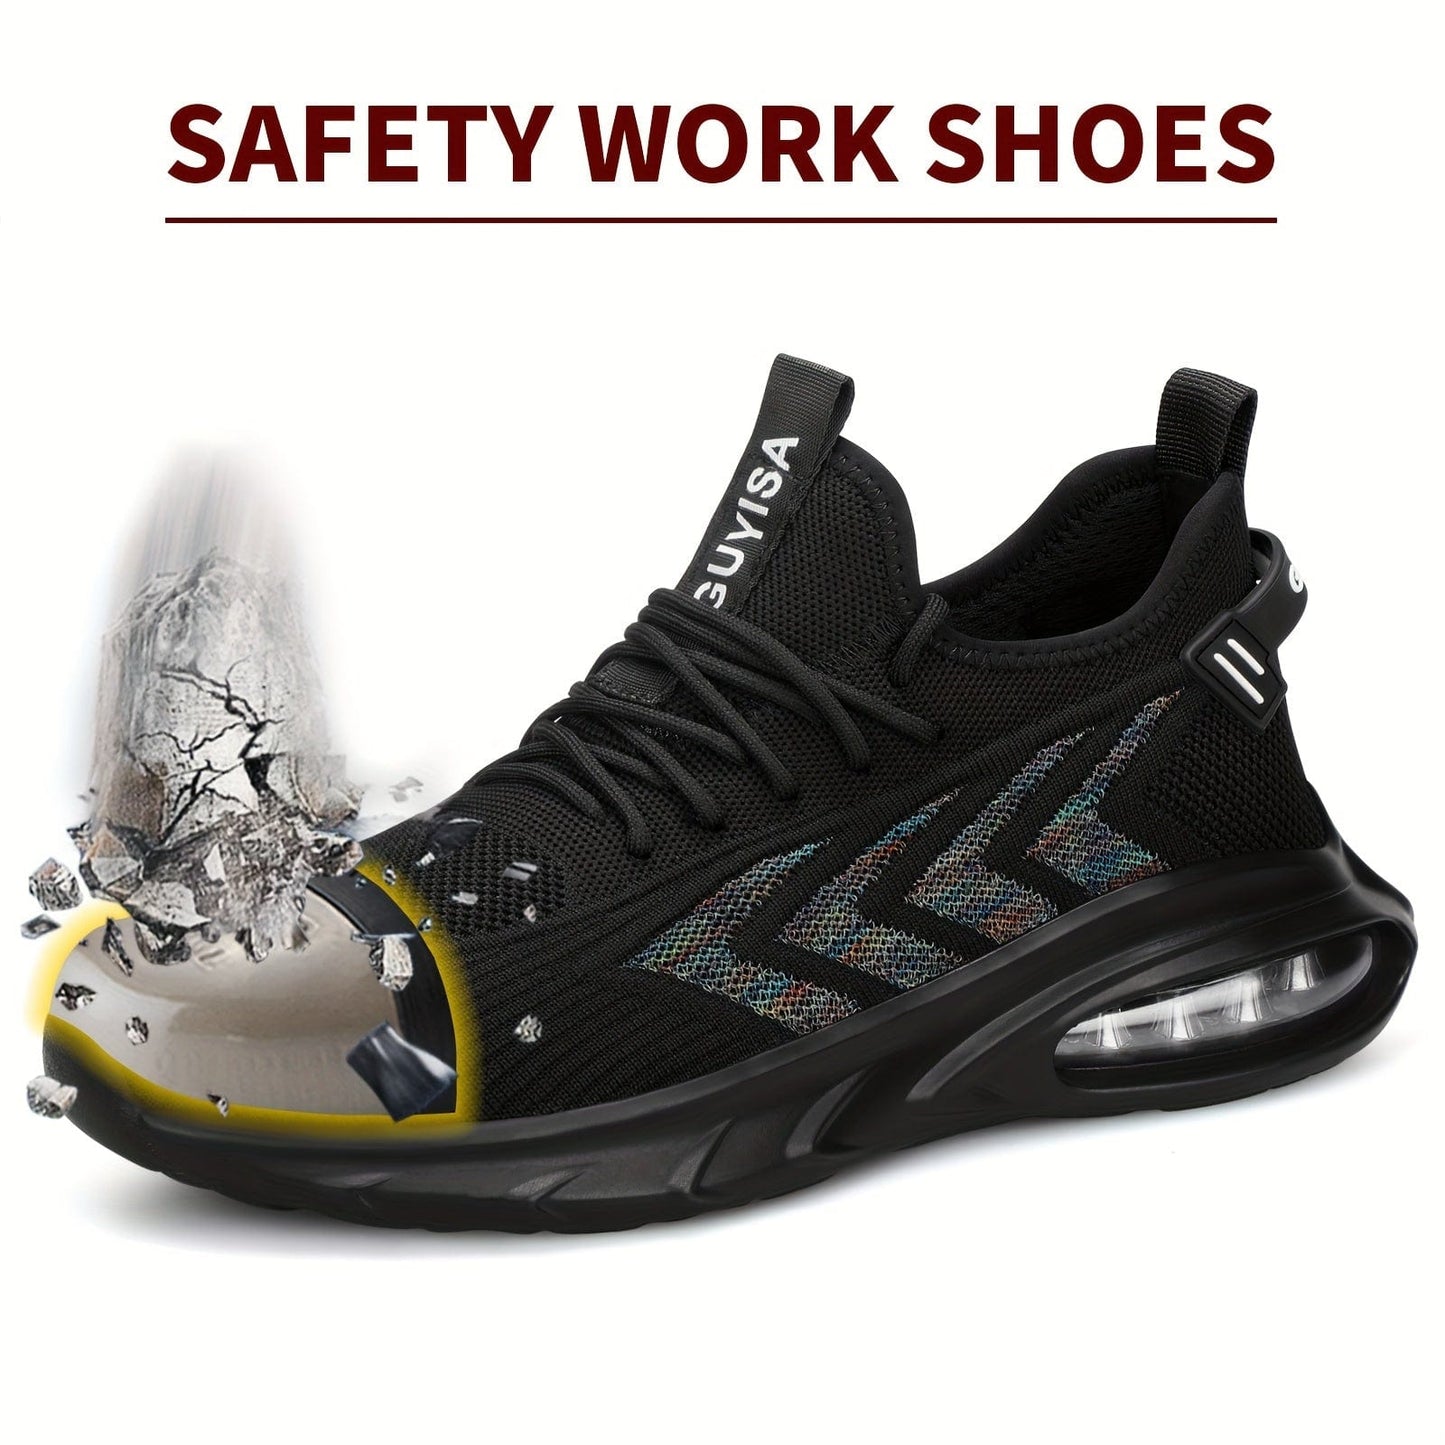 Men's Steel Toe Lightweight Safety Shoes Puncture Proof Air Cushioned Work Shoes, Industrial And Construction Site